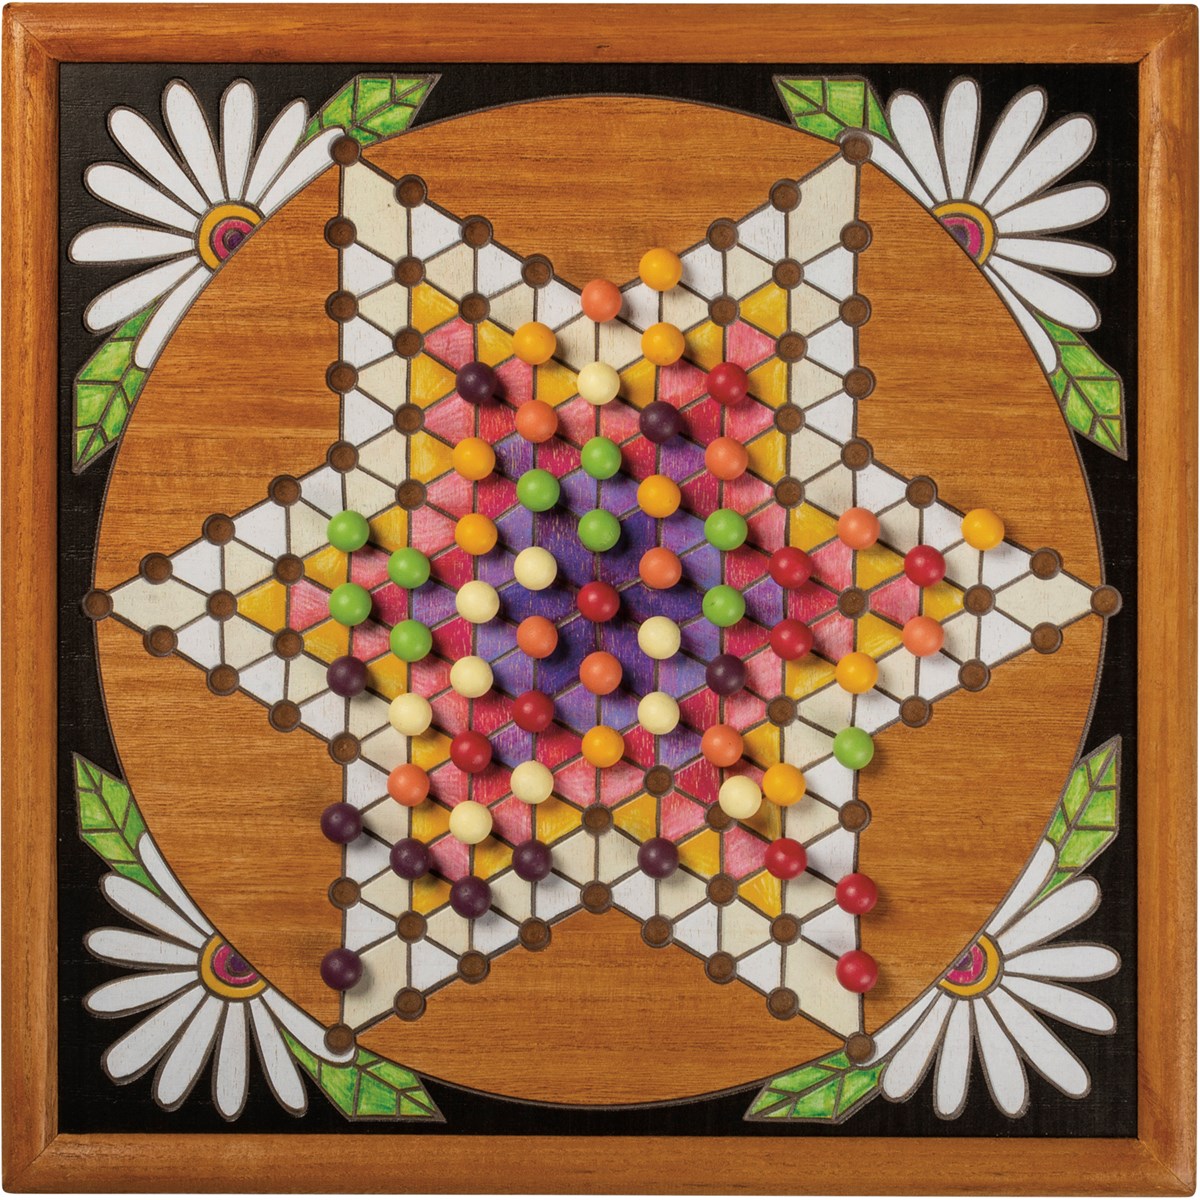 Chinese Checkers Wall Game - Wood, Plastic, Cotton